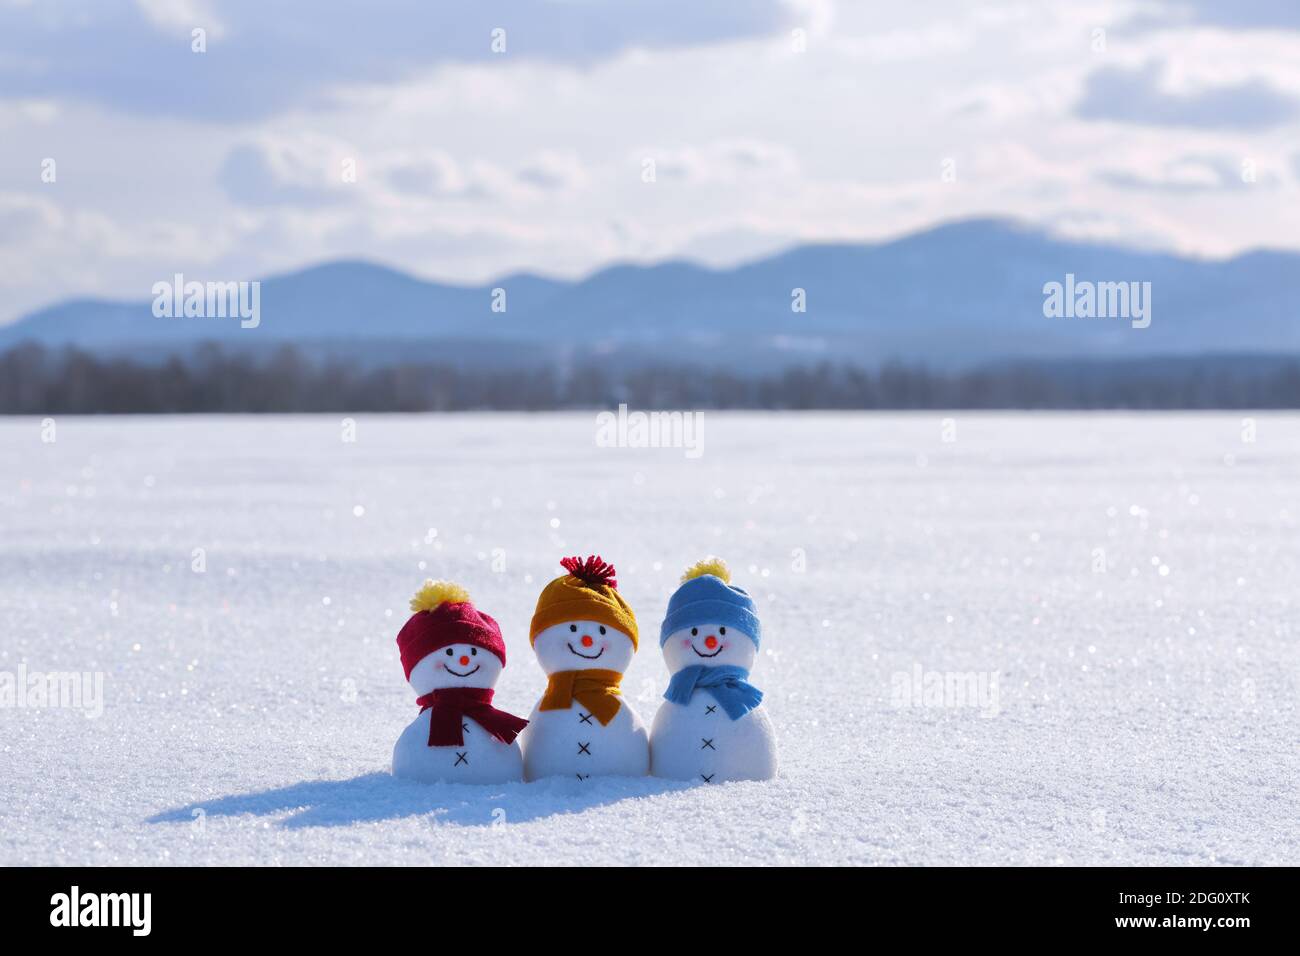 Snowman in hat and scalf on snowy field. Beautiful winter background. Merry christmas and happy new year. Landscape with high mountains. Stock Photo